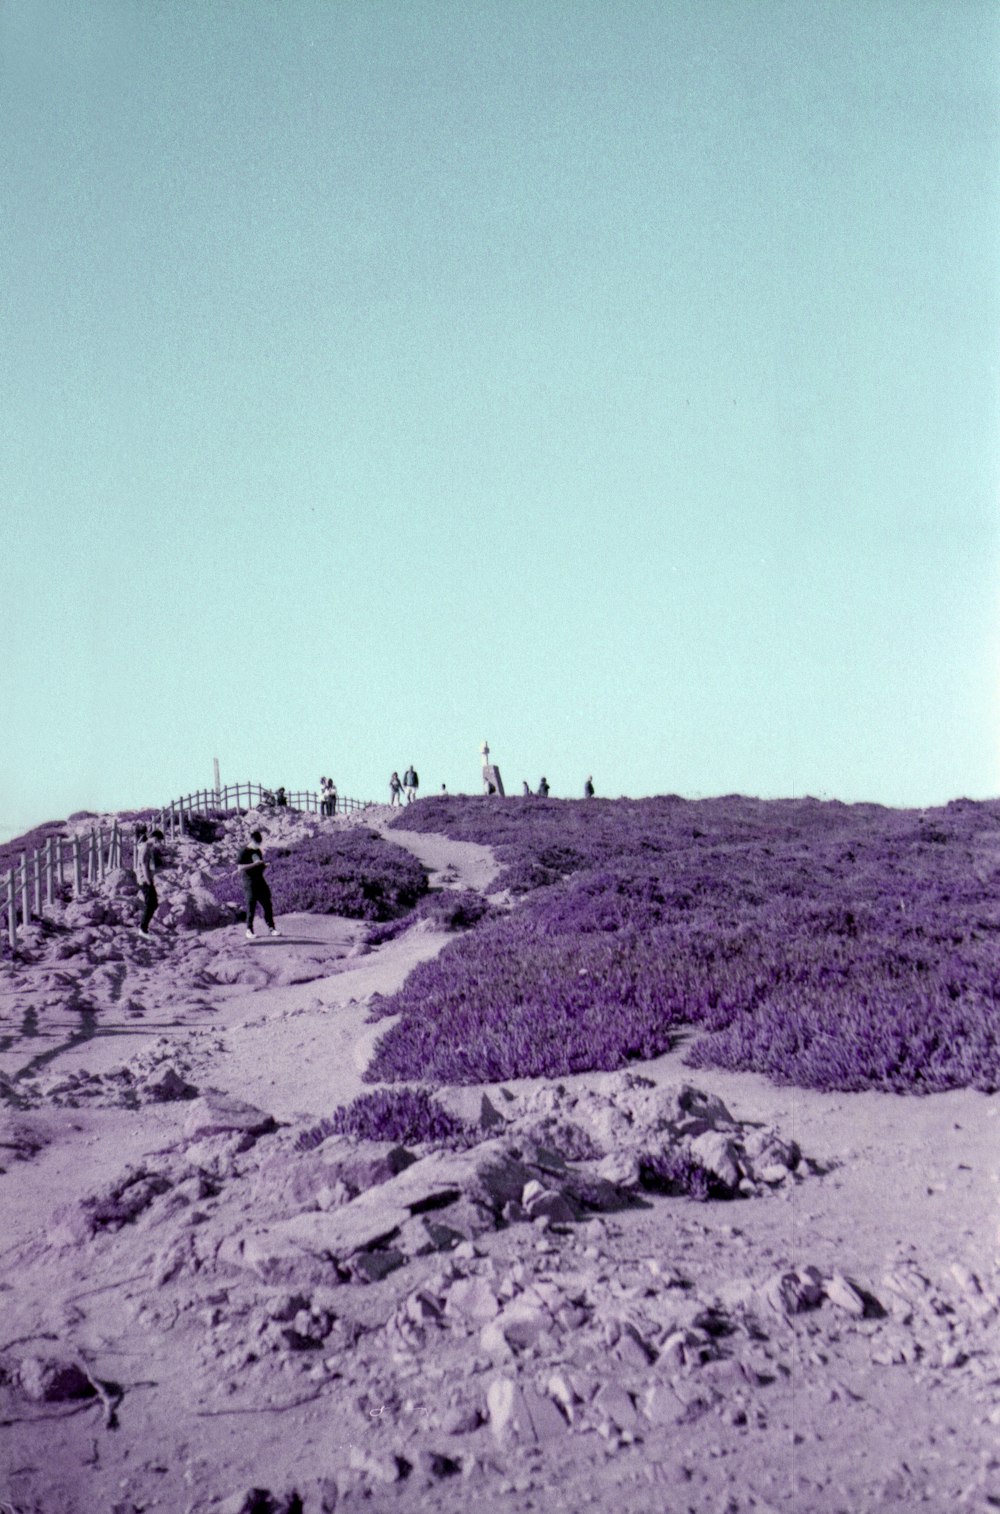 a group of people standing on top of a purple hill